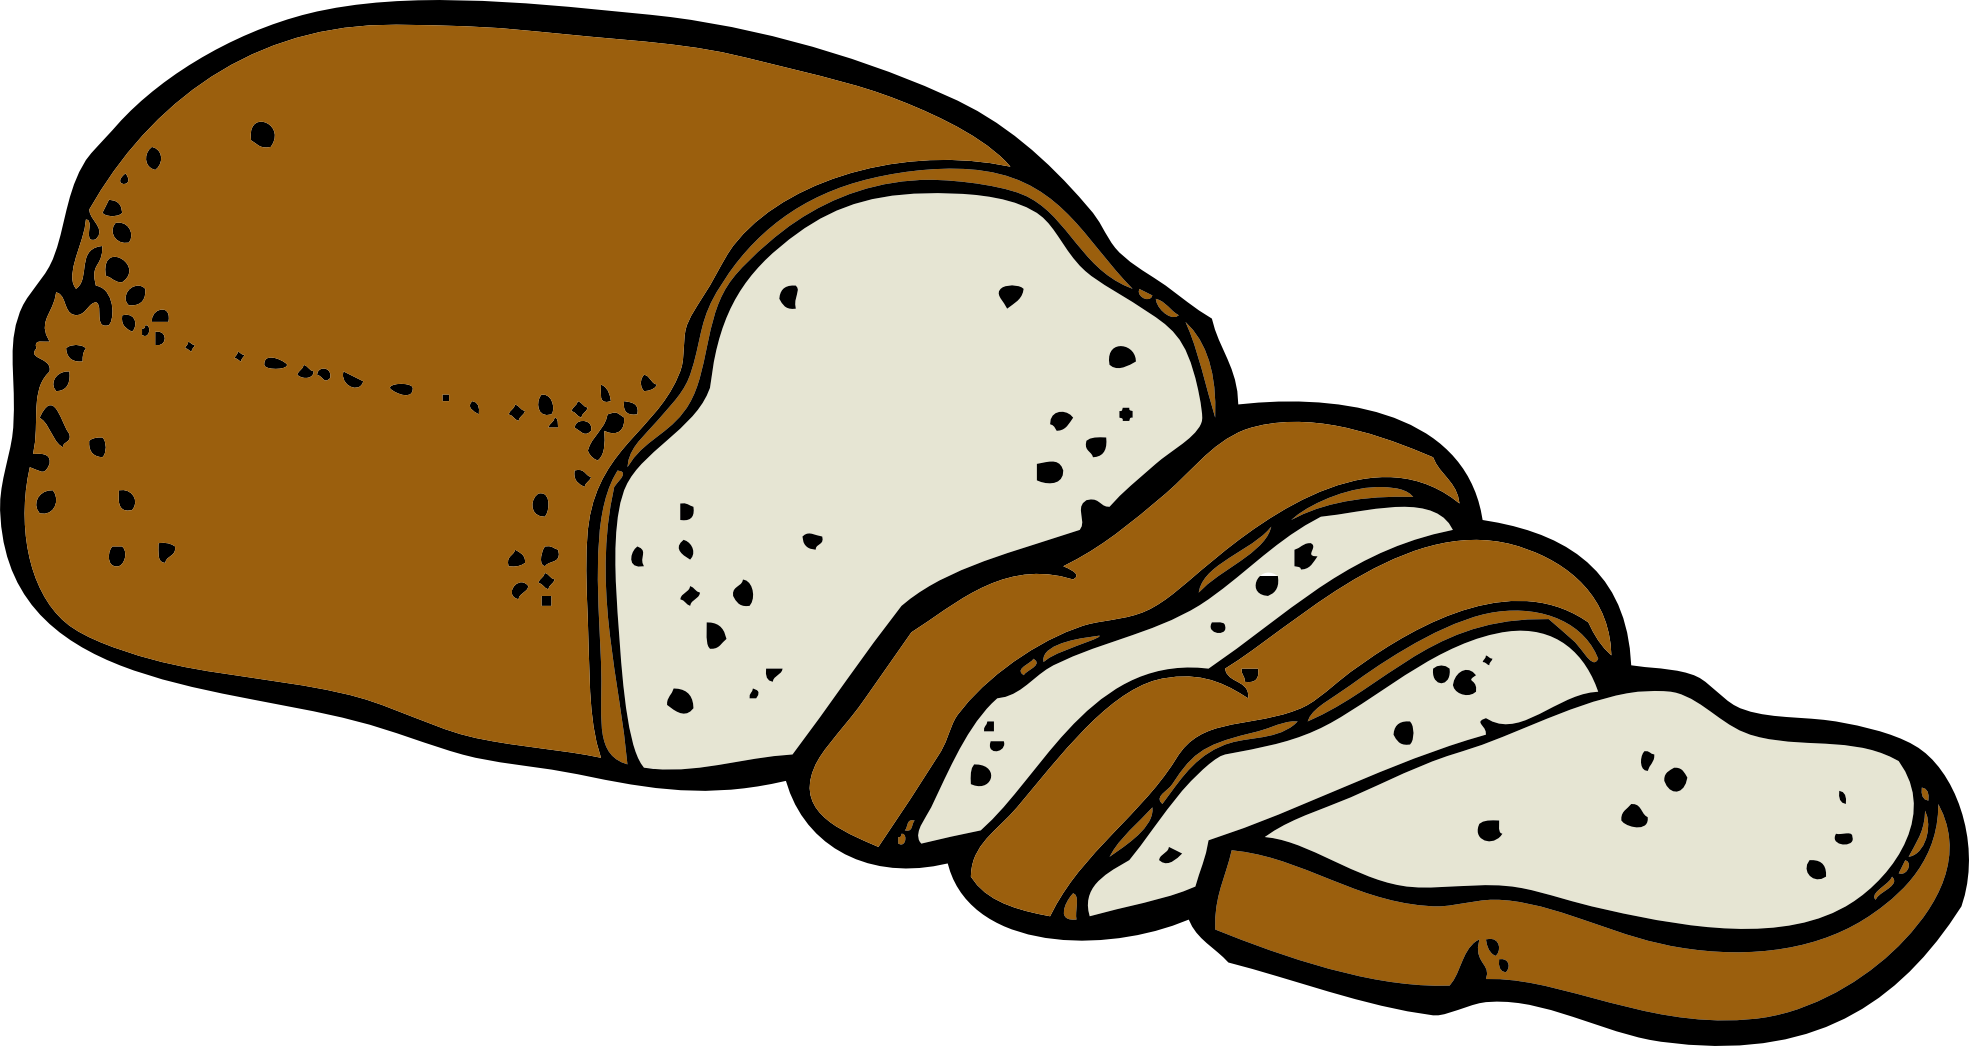 Panda free images breadclipart. Water clipart bread